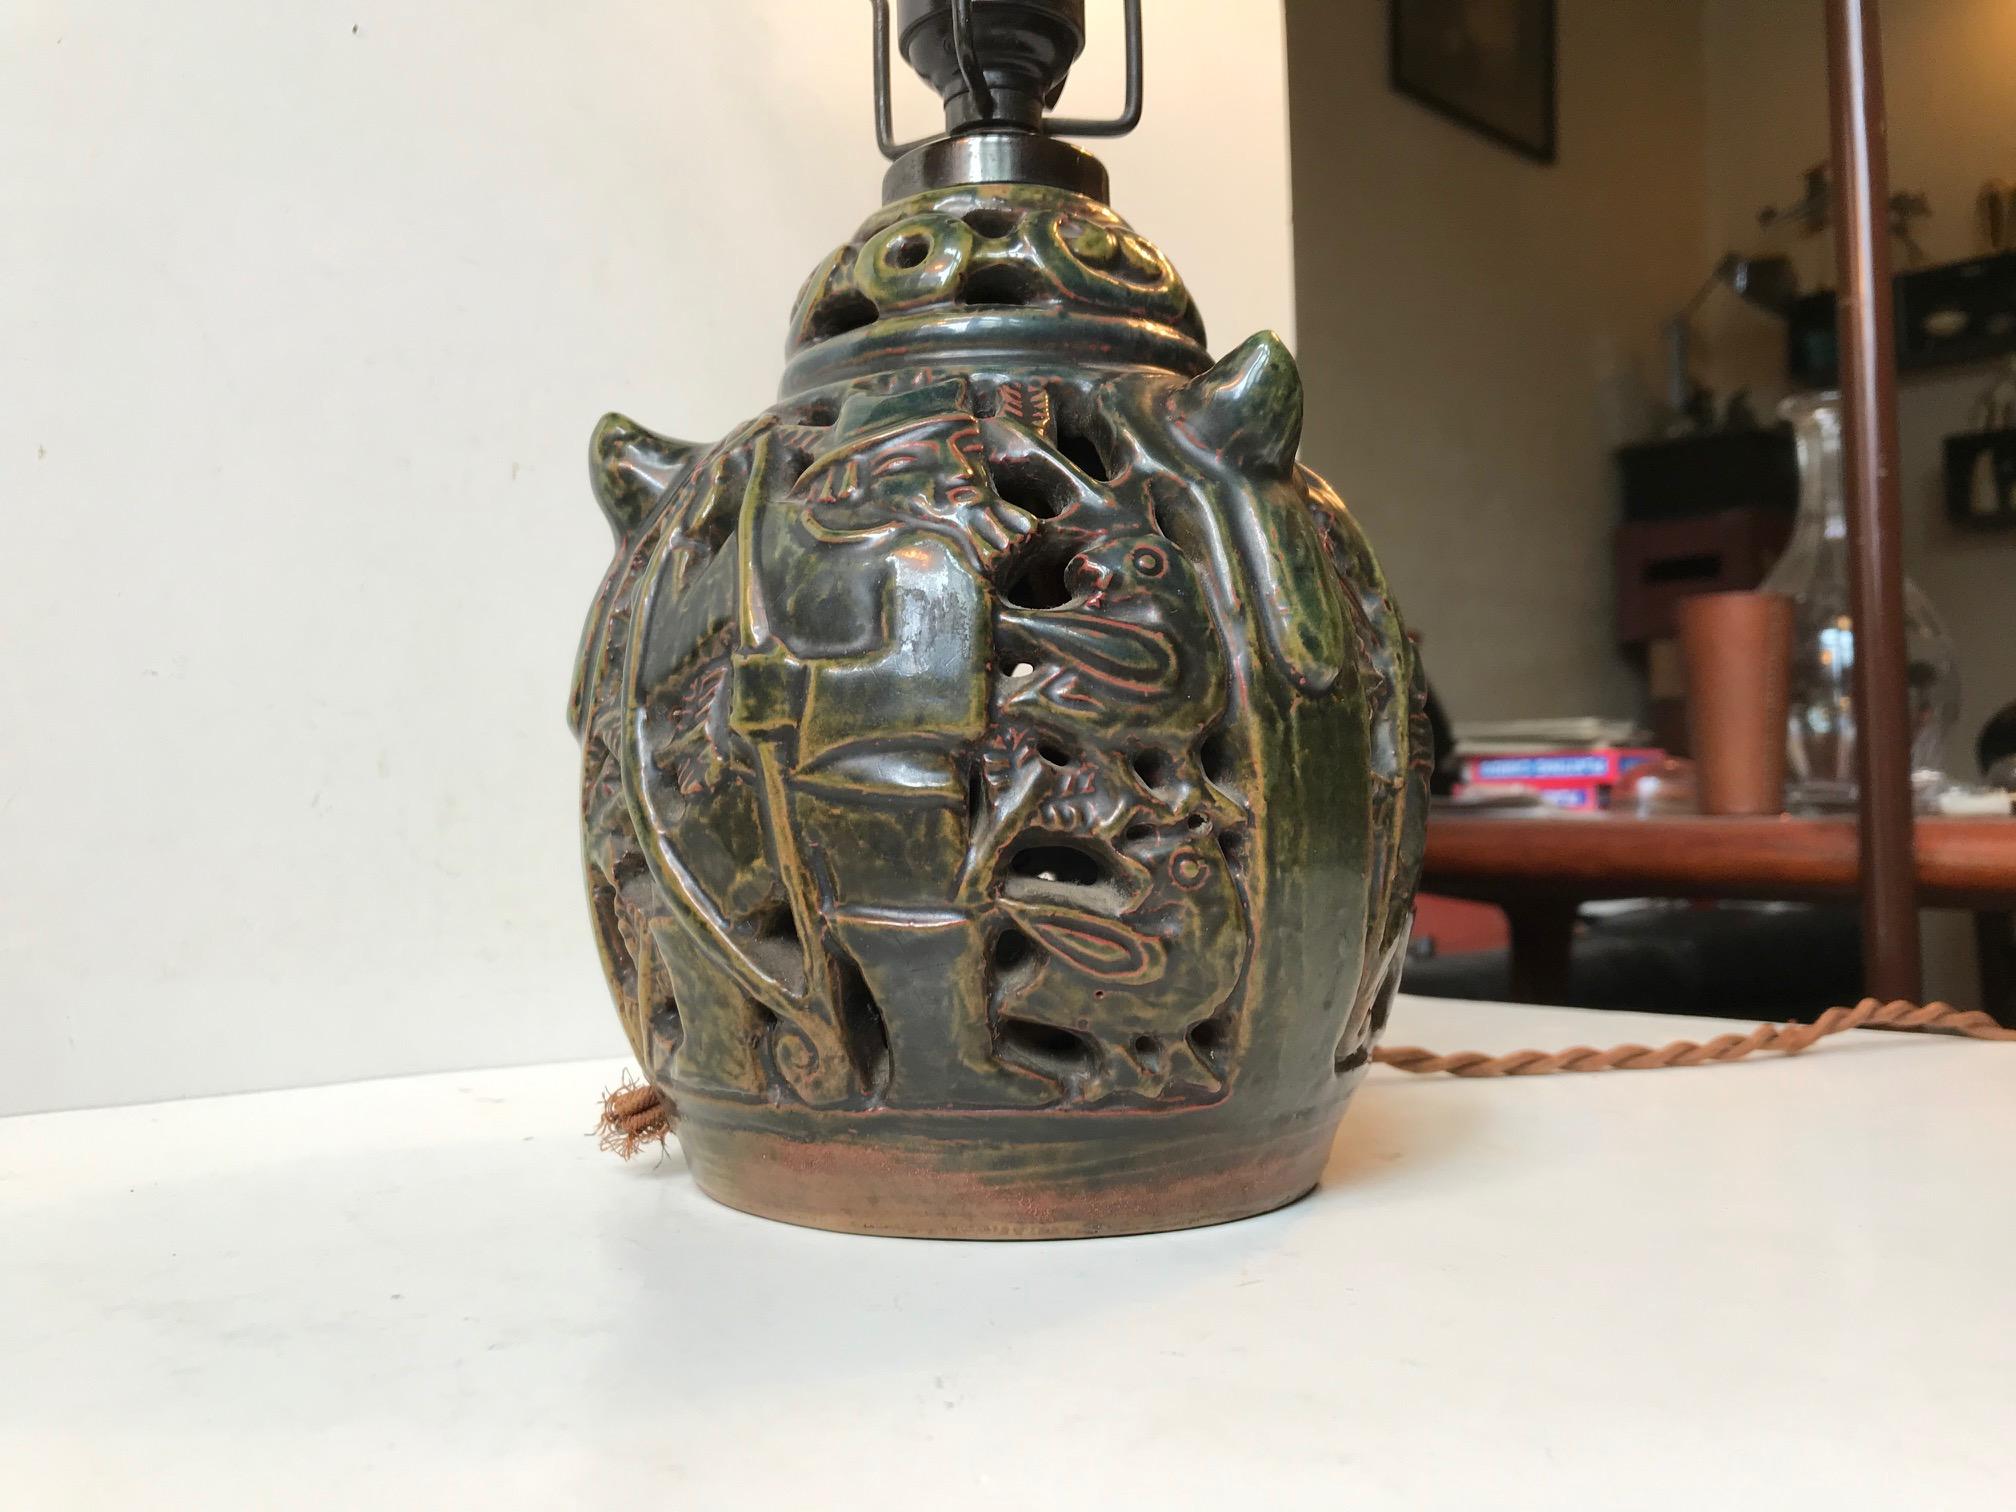 Lauritz Hjorth Ceramic Table Lamp with Hunting Motifs, 1920s For Sale 2